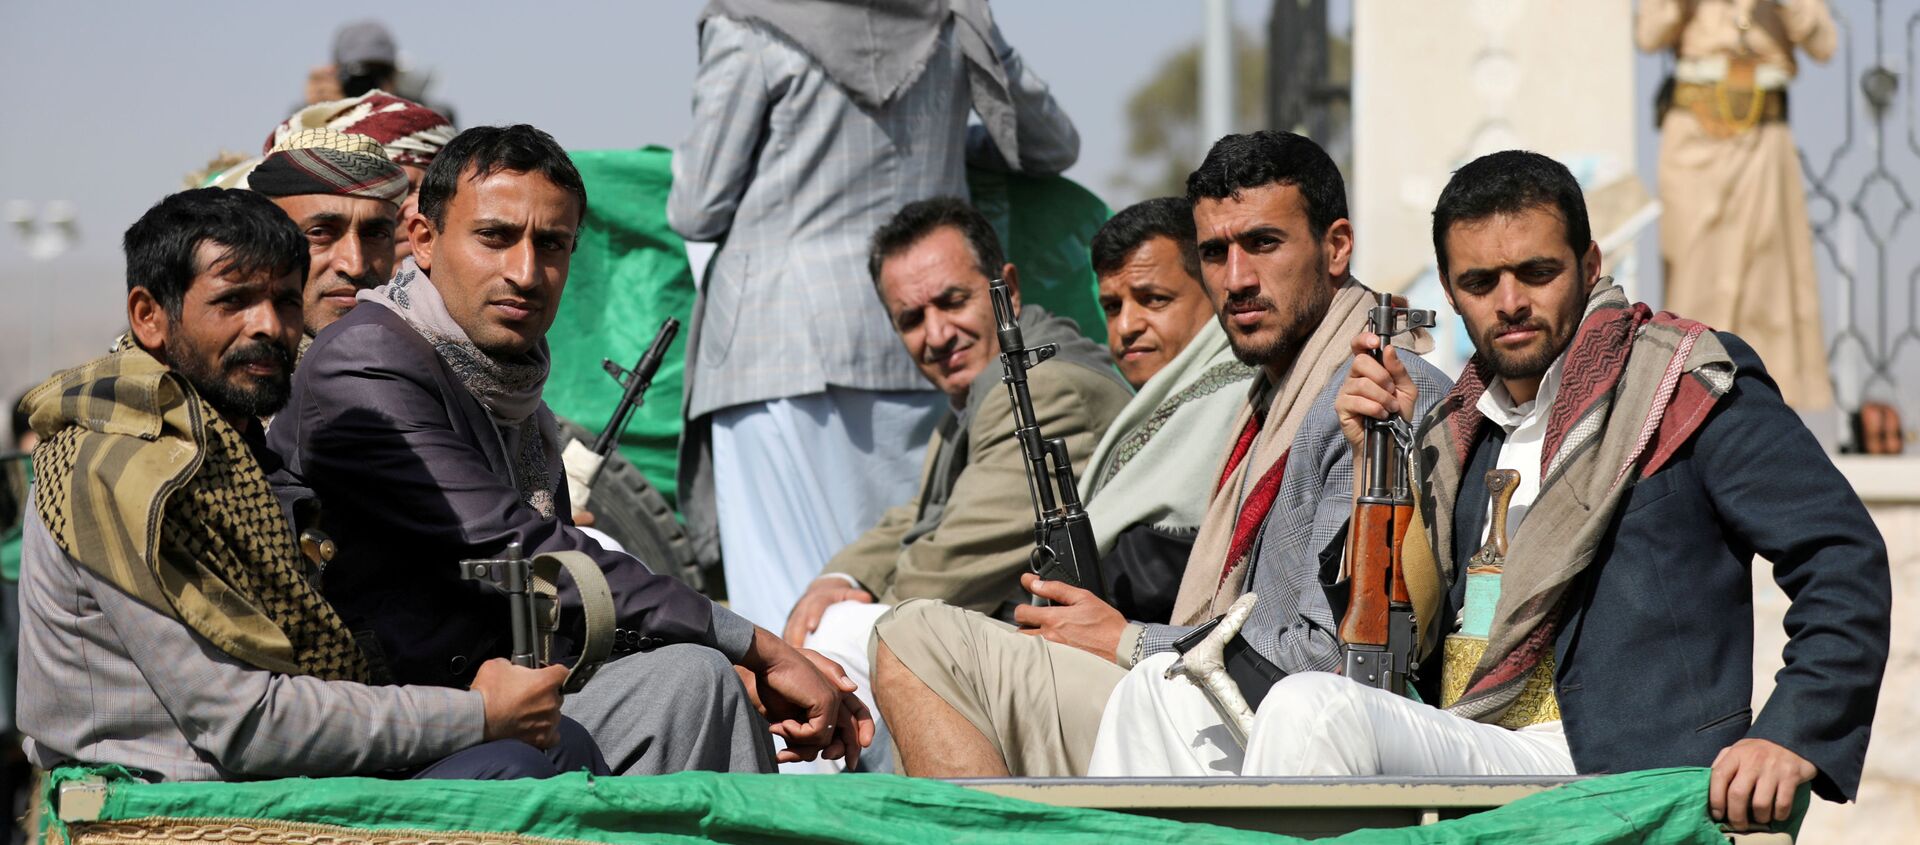 Armed Houthi followers ride on the back of a truck after participating in a funeral of Houthi fighters killed in recent fighting against government forces in Yemen's oil-rich province of Marib, in Sanaa, Yemen February 20, 2021.  - Sputnik International, 1920, 20.05.2021